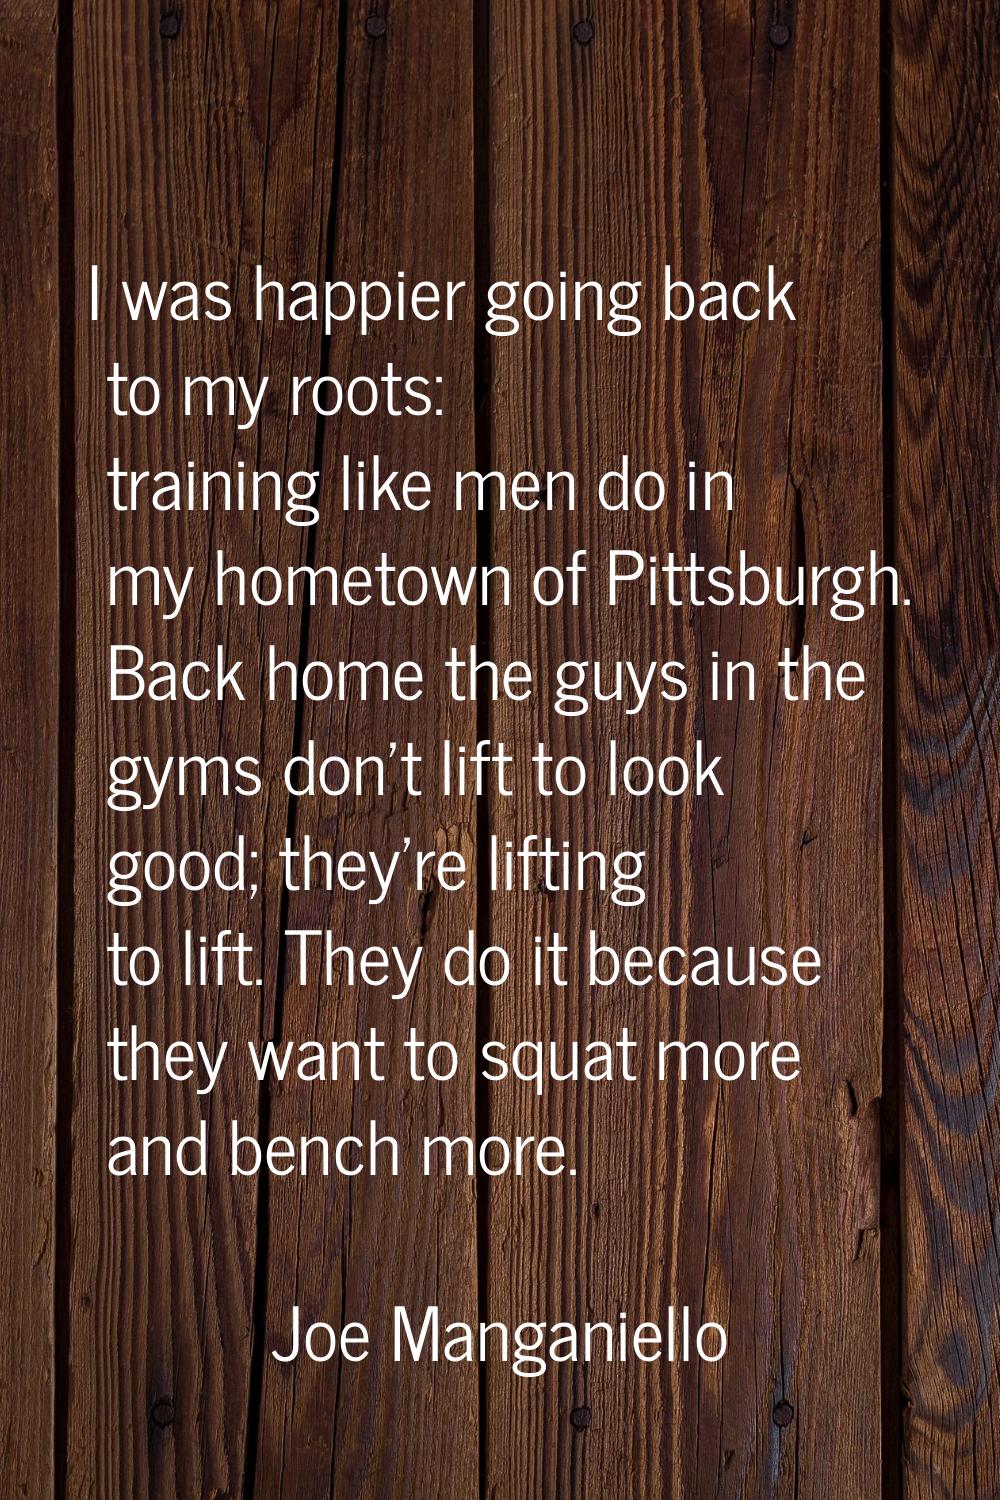 I was happier going back to my roots: training like men do in my hometown of Pittsburgh. Back home 